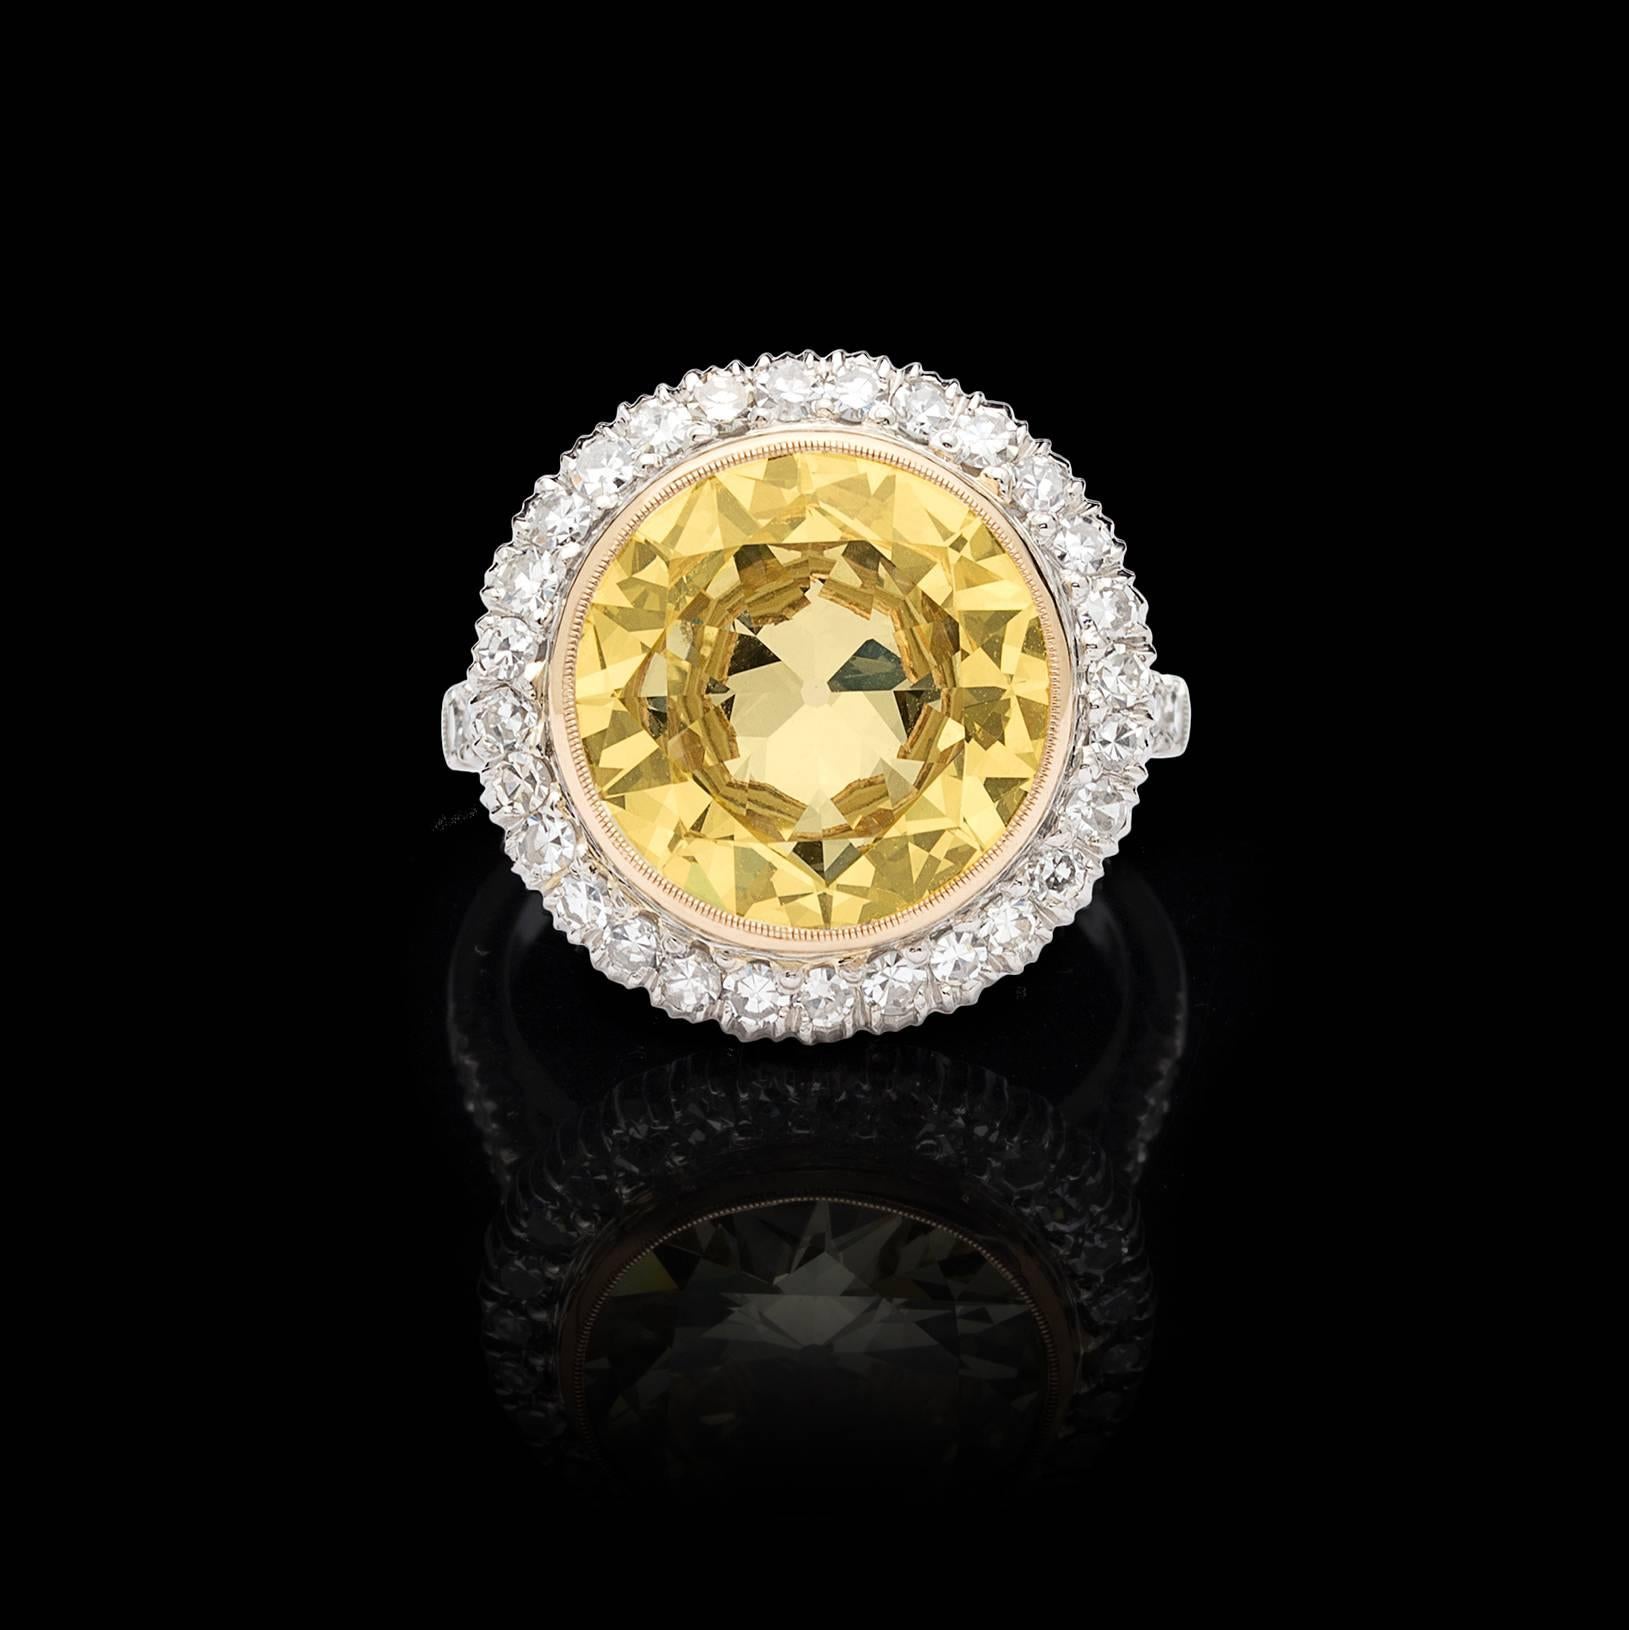 This is a ring that will stop traffic. Showcasing a 6.18-cts. circular-cut Fancy Light Yellow diamond, with impressive VVS2 clarity, bezel-set in yellow gold on a platinum mount and framed by 38 sparkling single-cut diamonds, weighing in total an